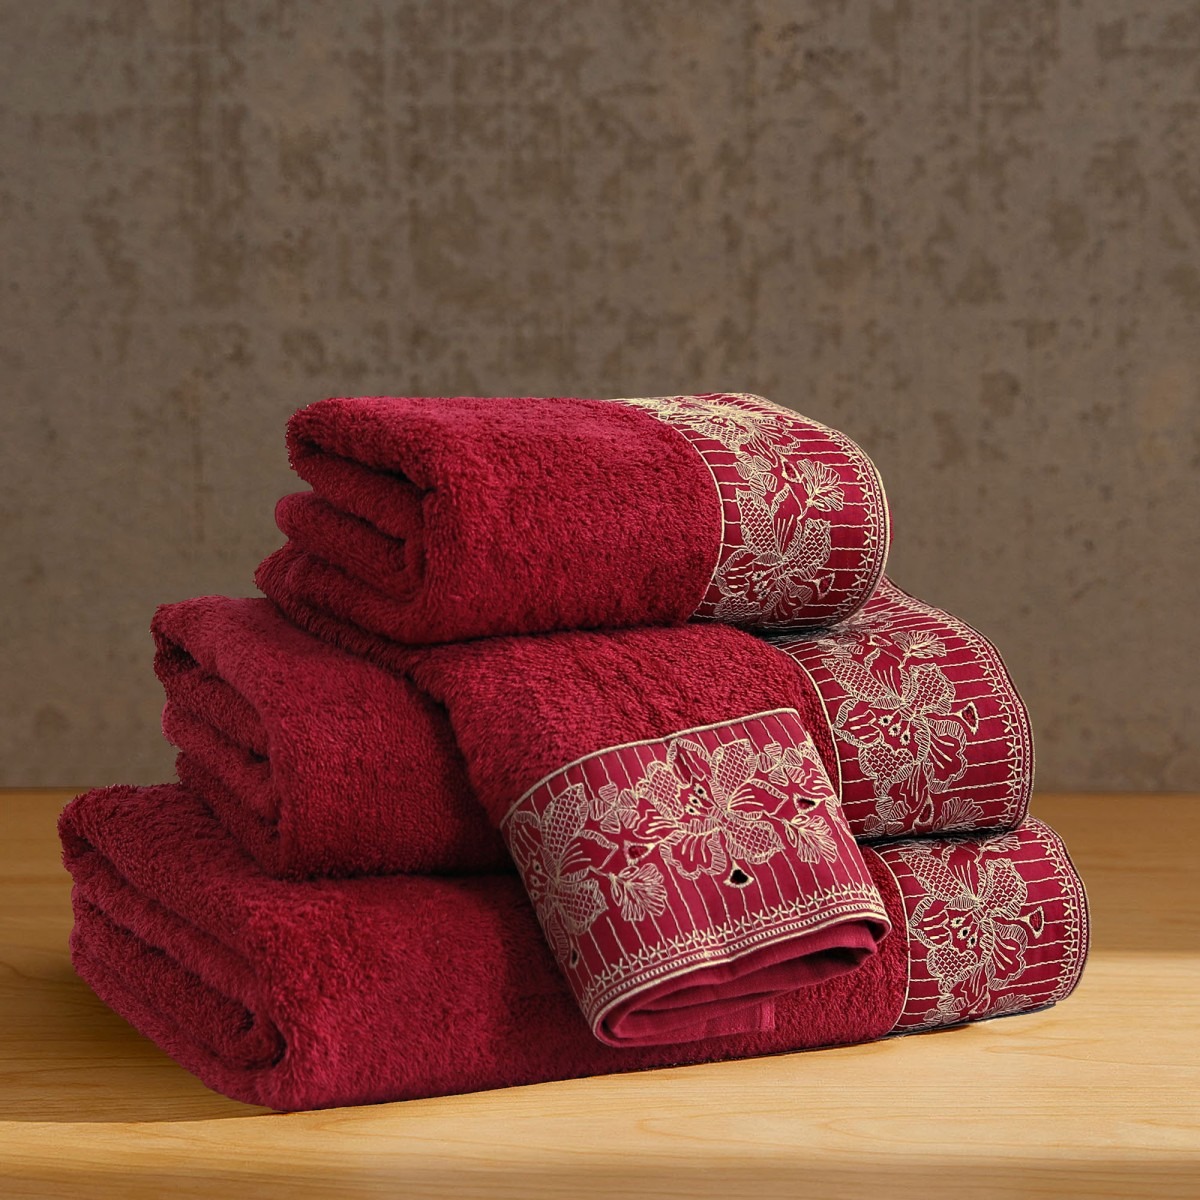 Laced - Embroidered Towel Set